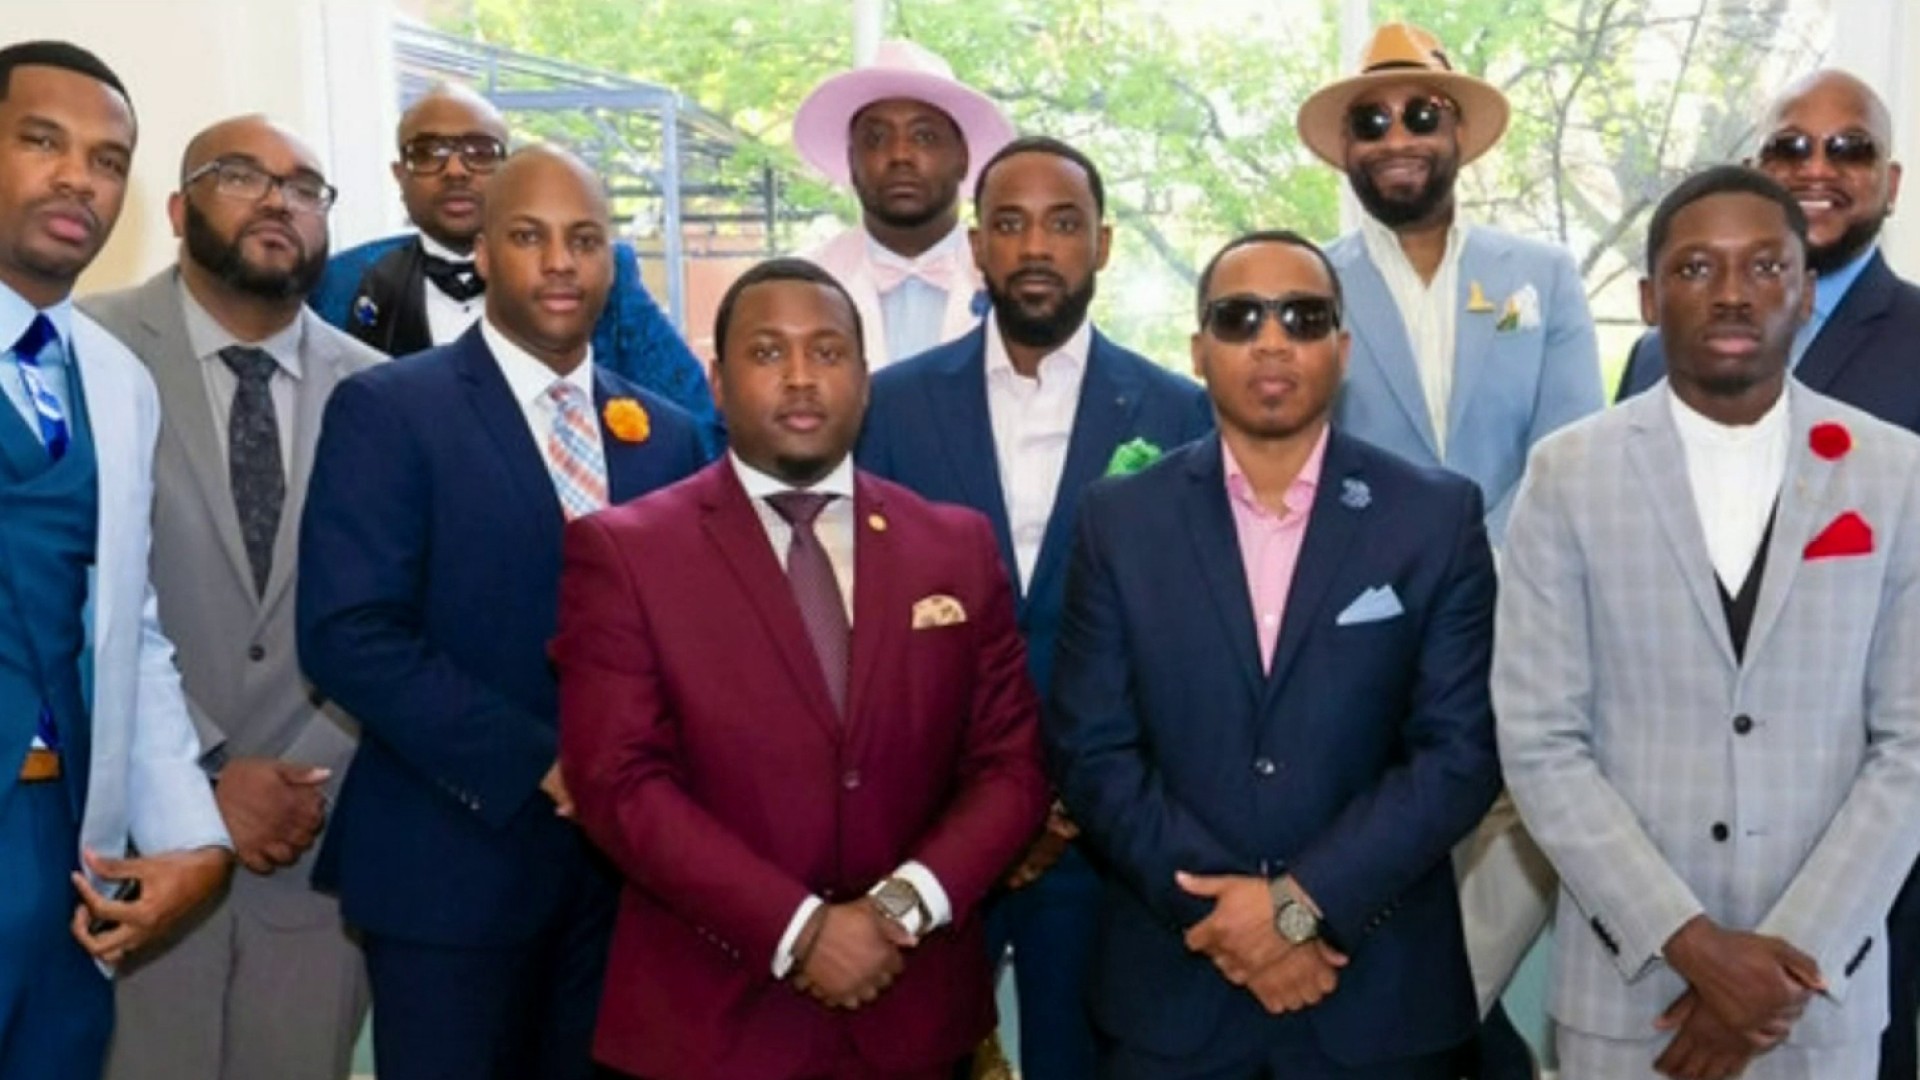 Black Menswear to host Detroit flash mob this weekend aimed at sharing positive stories